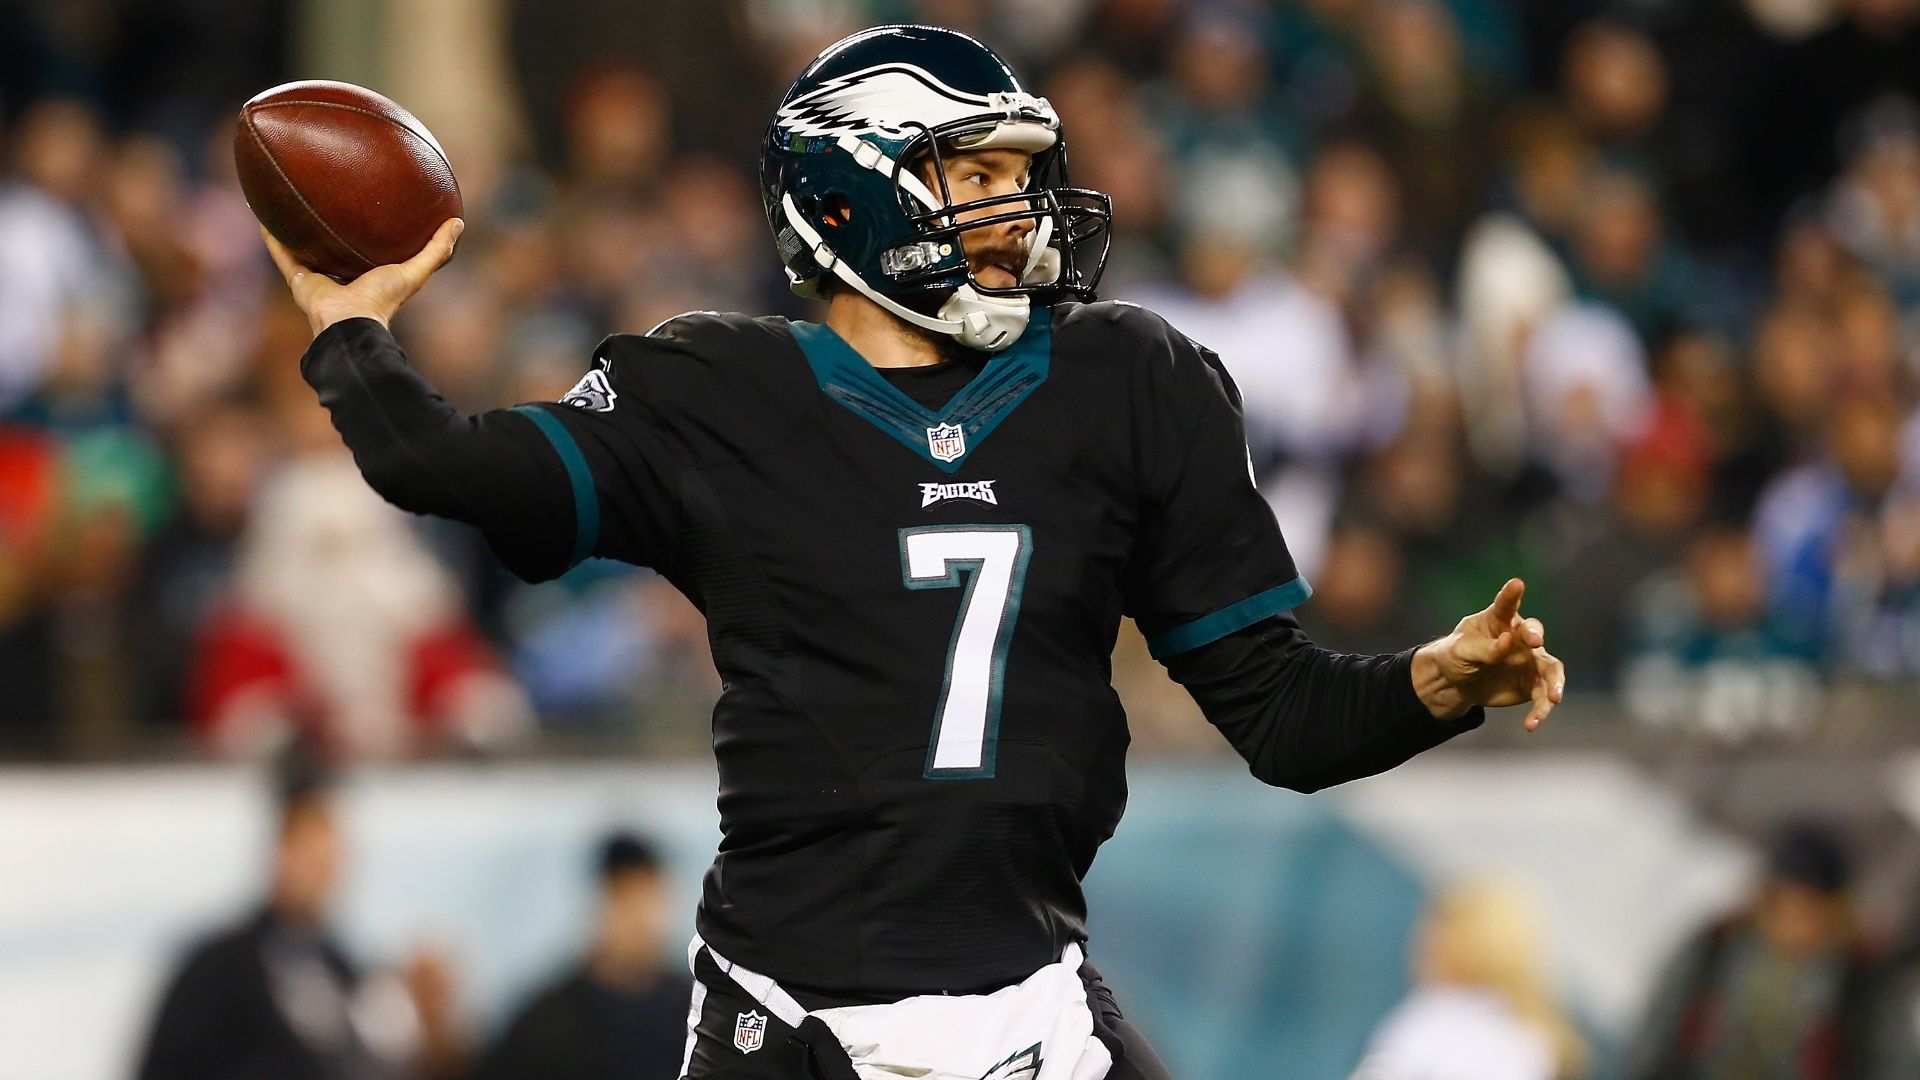 Golic: Bradford gives Eagles better chance to win